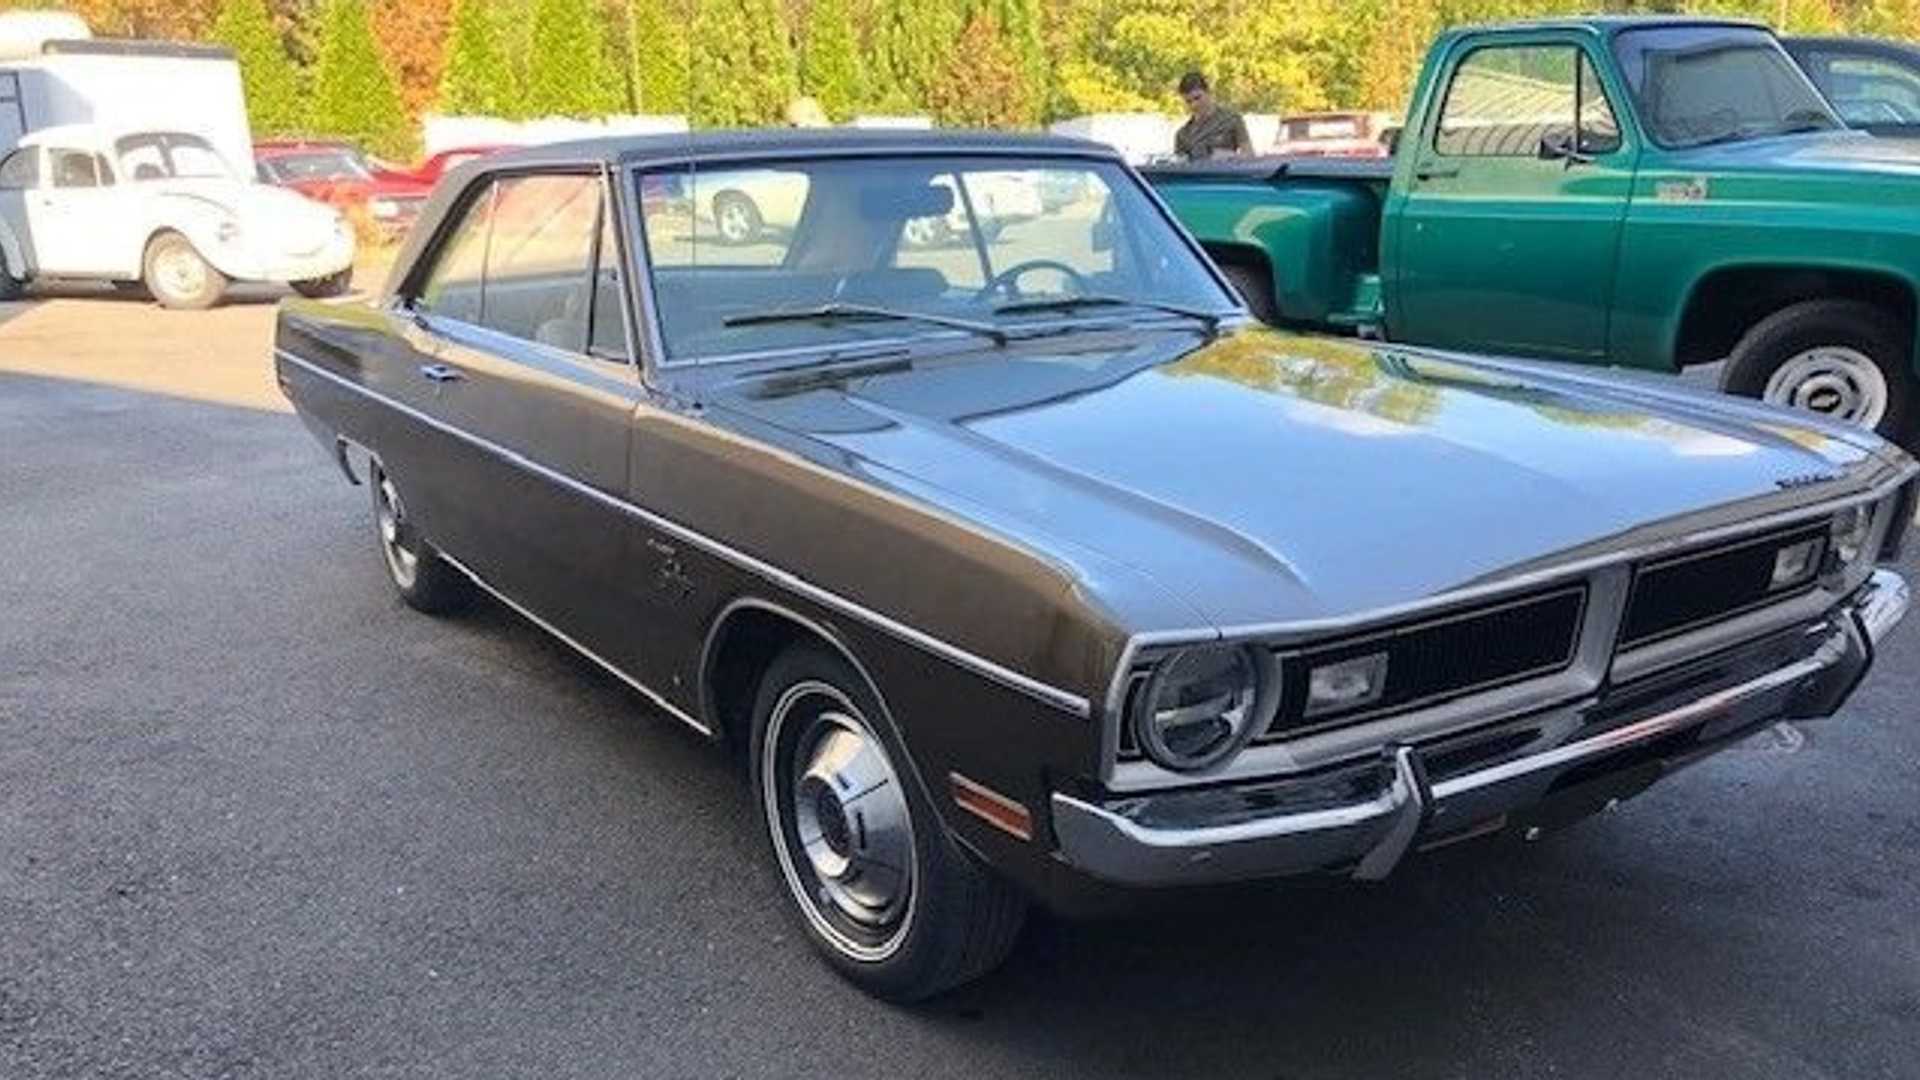 1971 Dodge Dart Swinger Is A Budget Classic At $10K